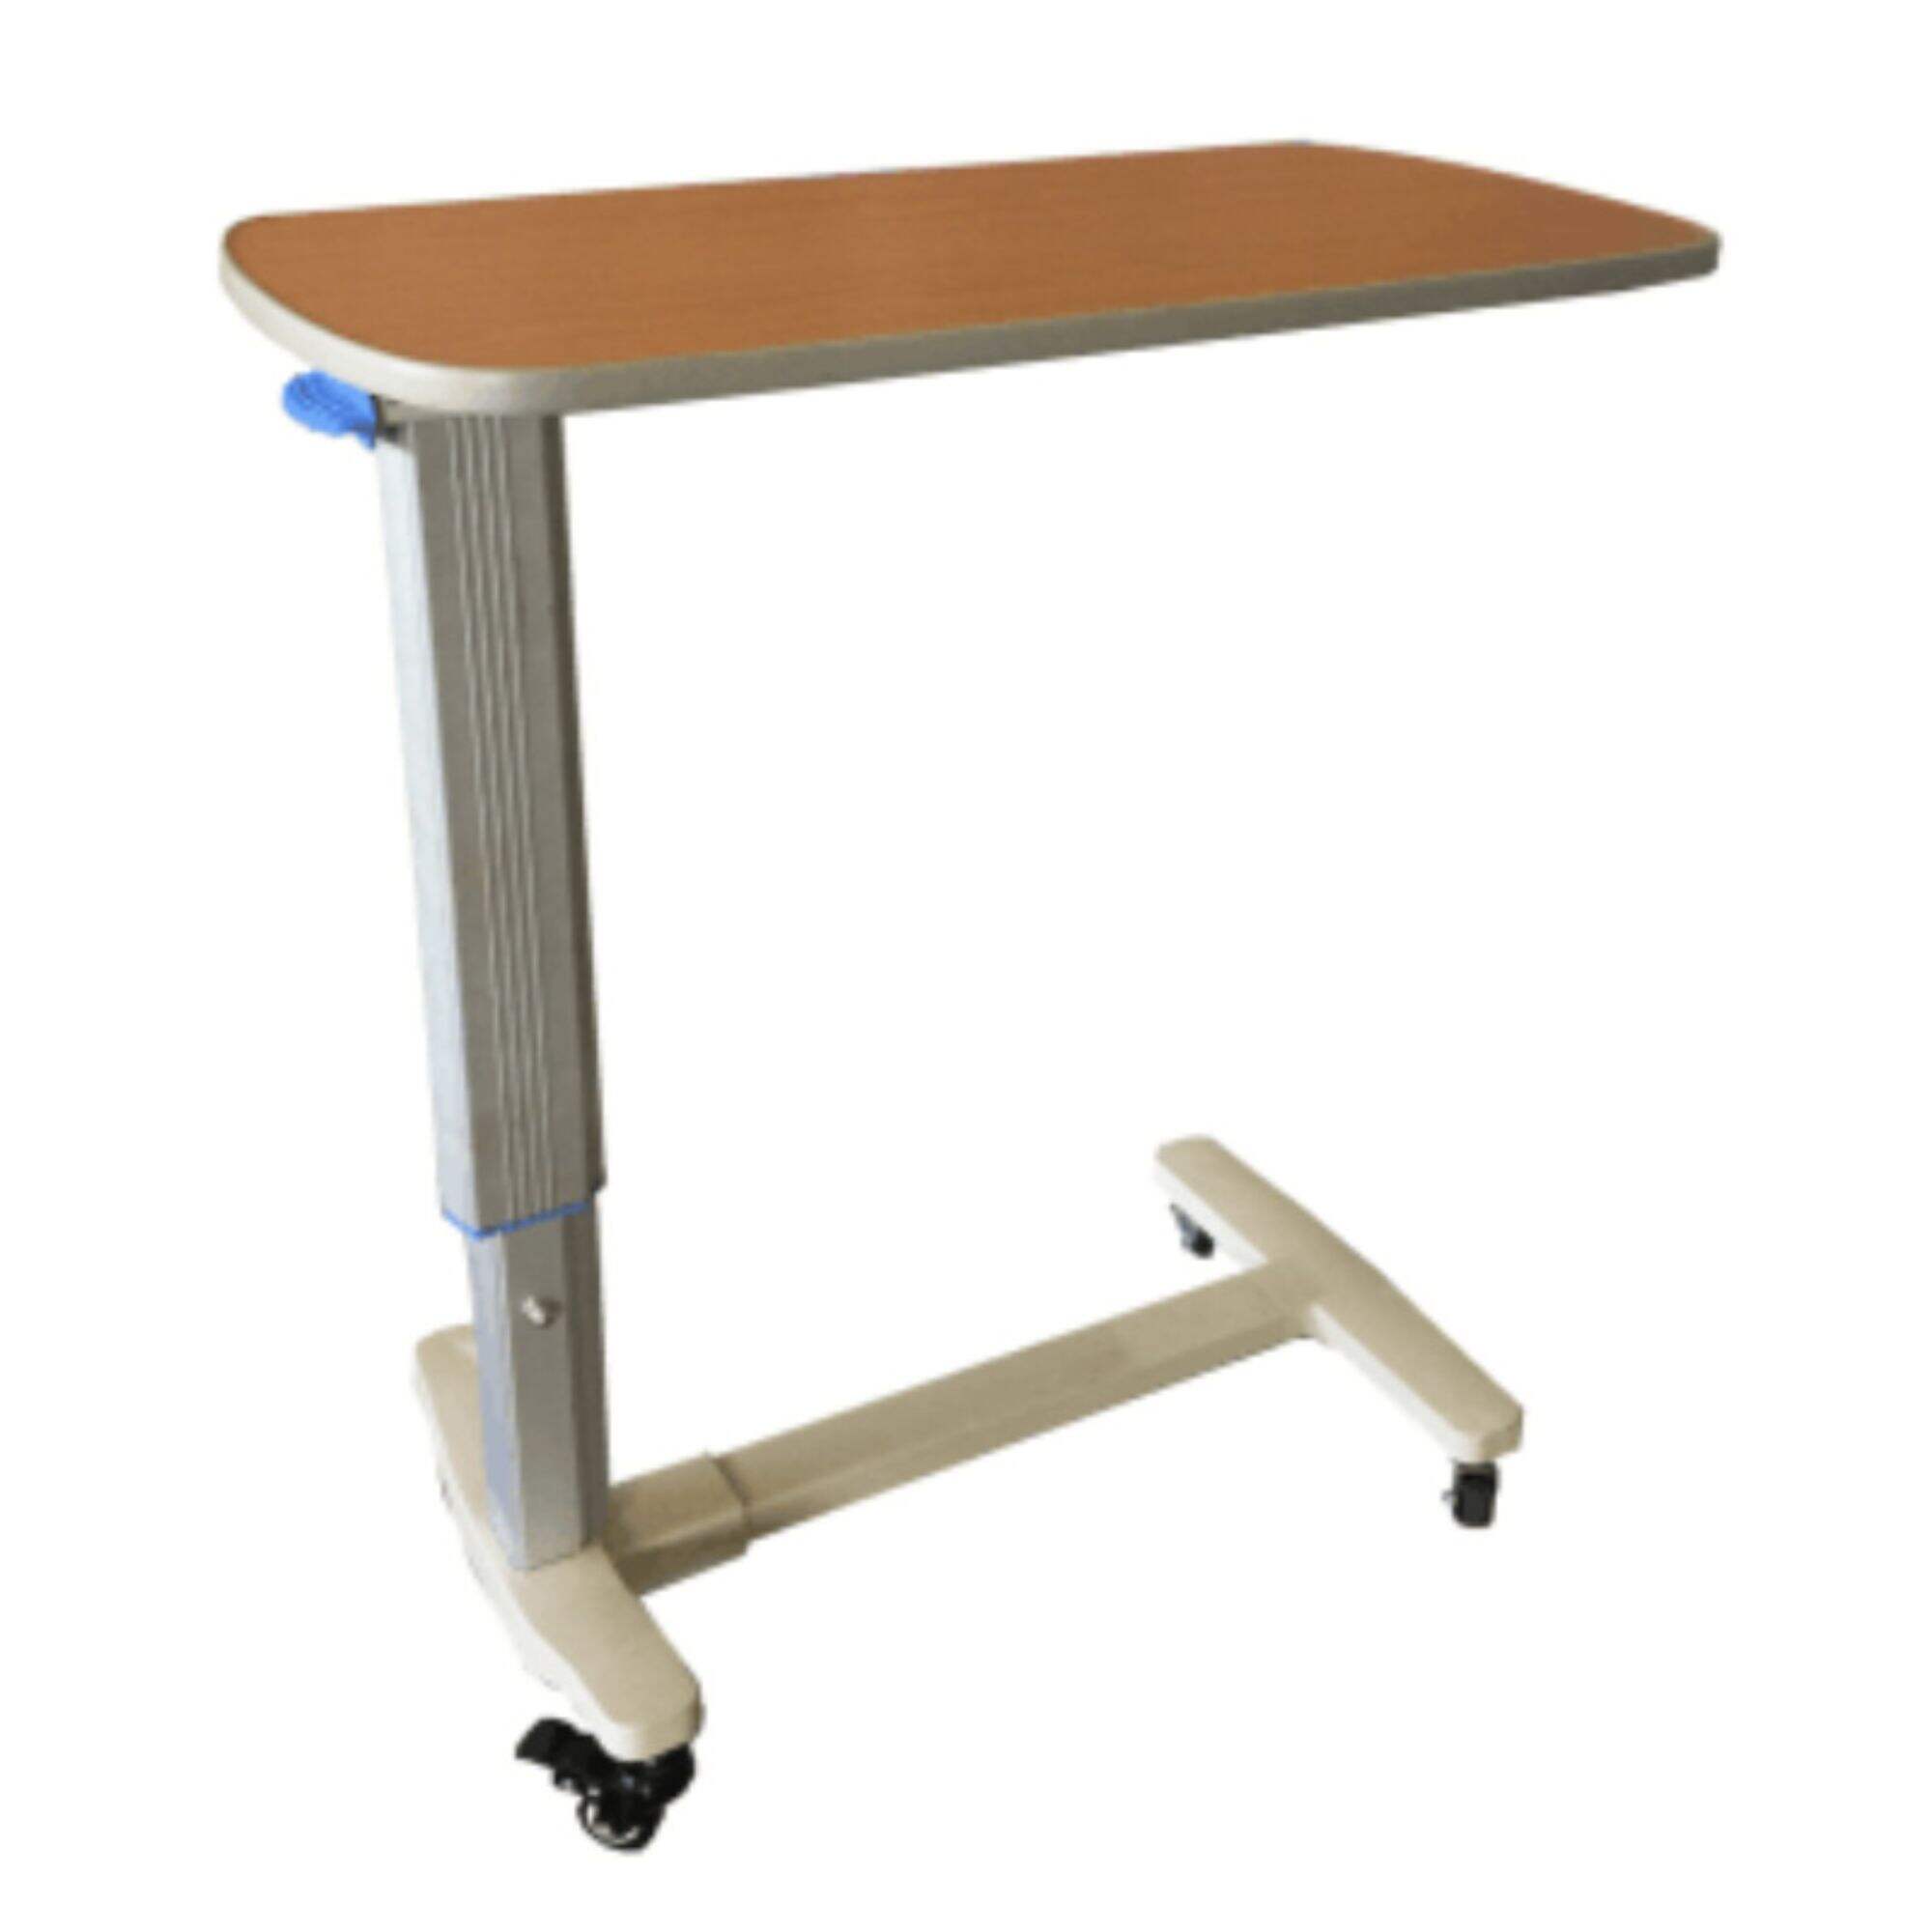 YFT004 Overbed Table